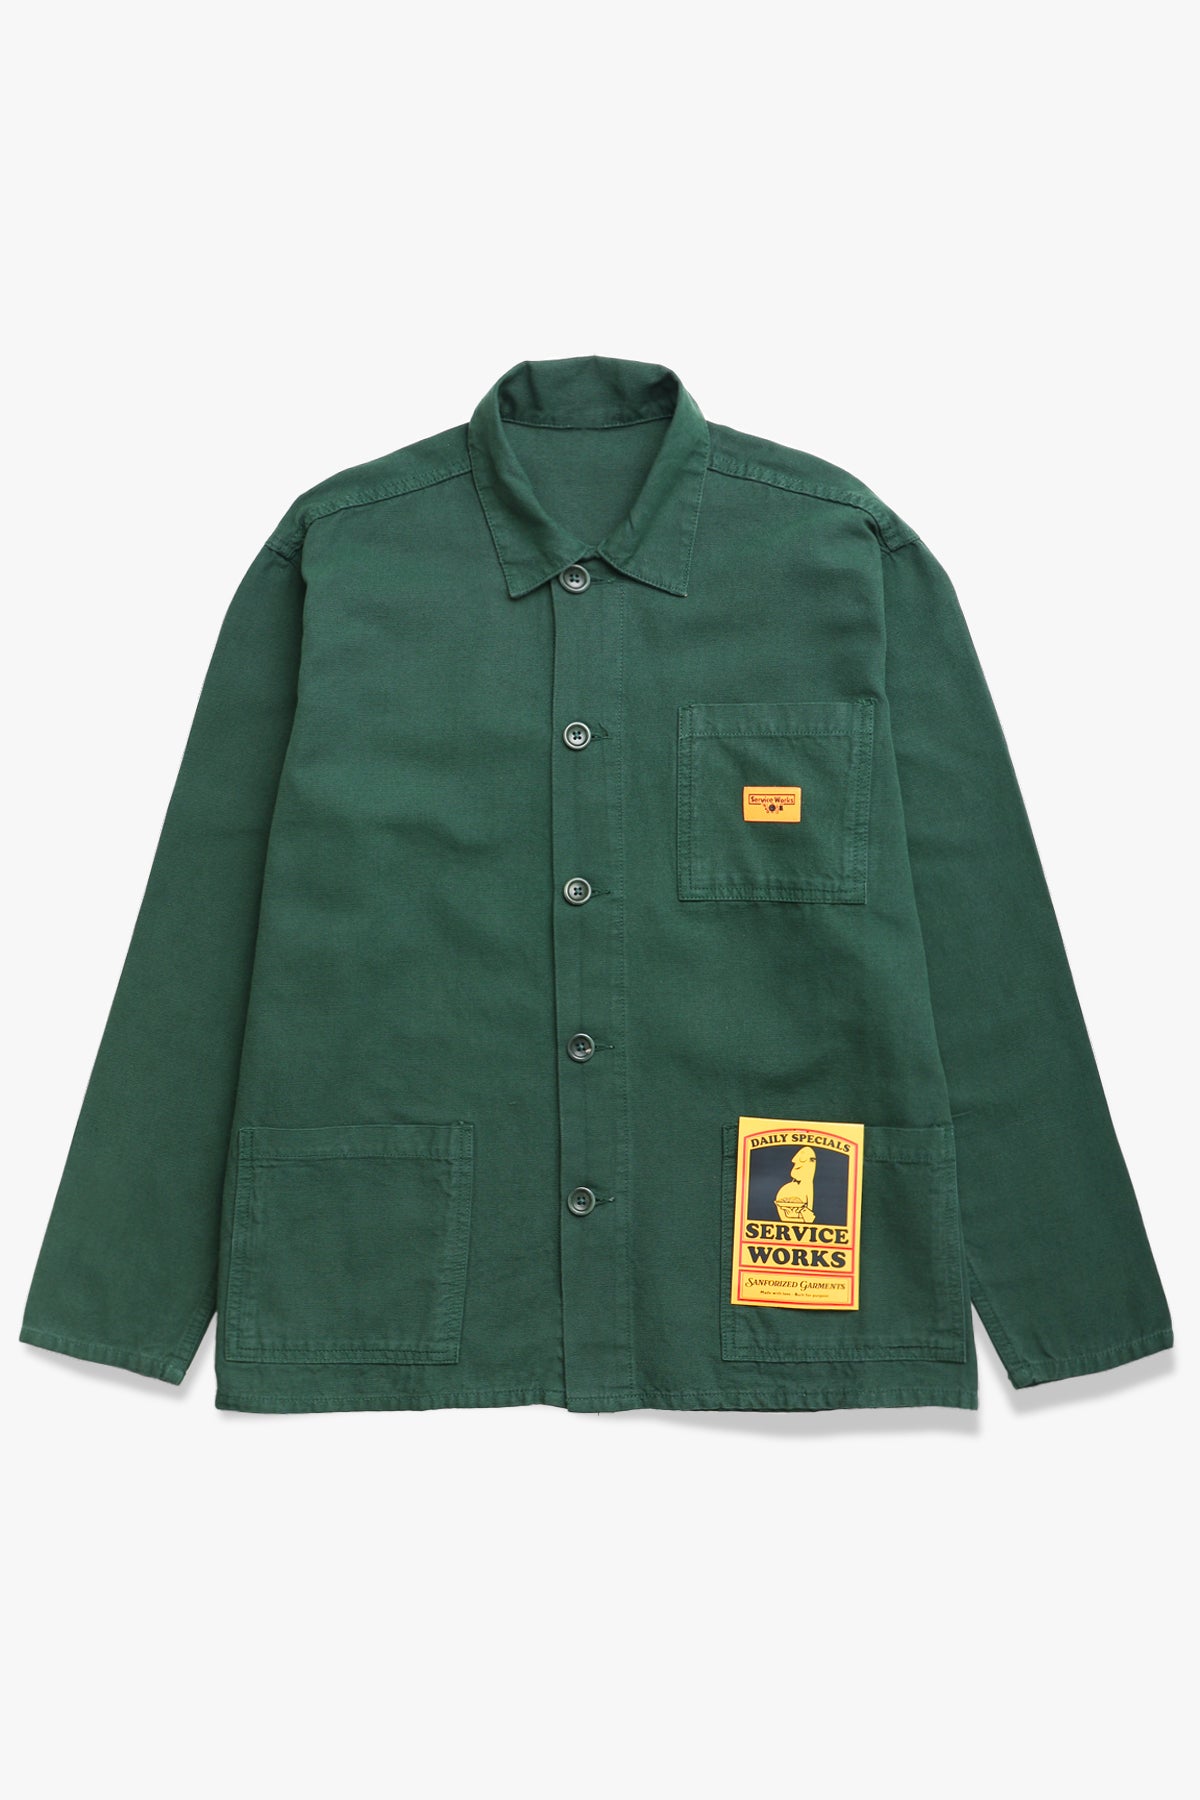 Service Works - Coverall Jacket - Forest